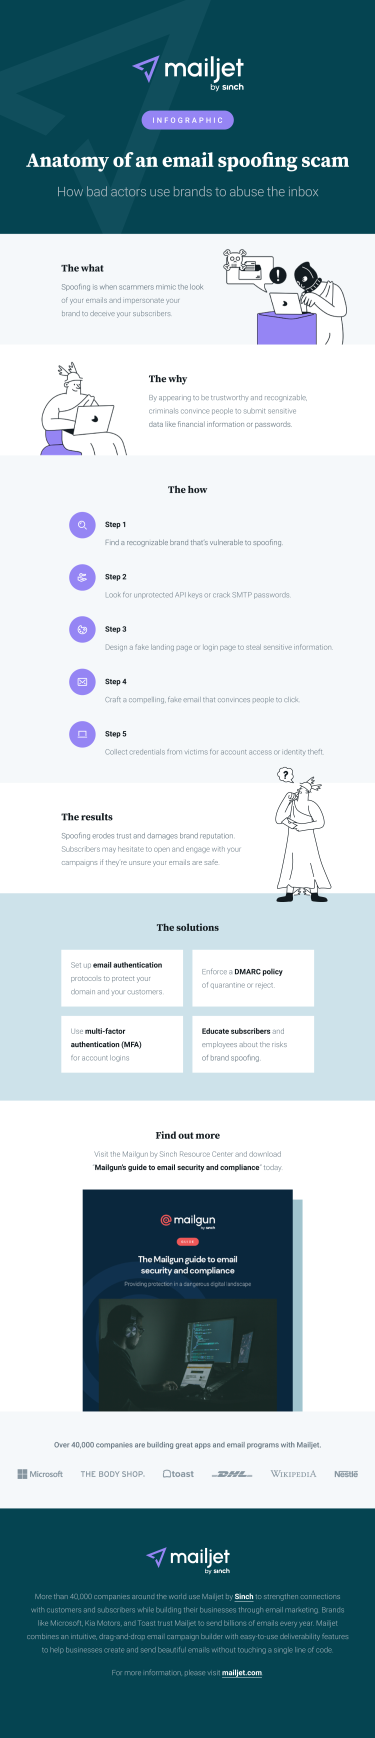 Infographic displaying the steps used in email brand spoofing